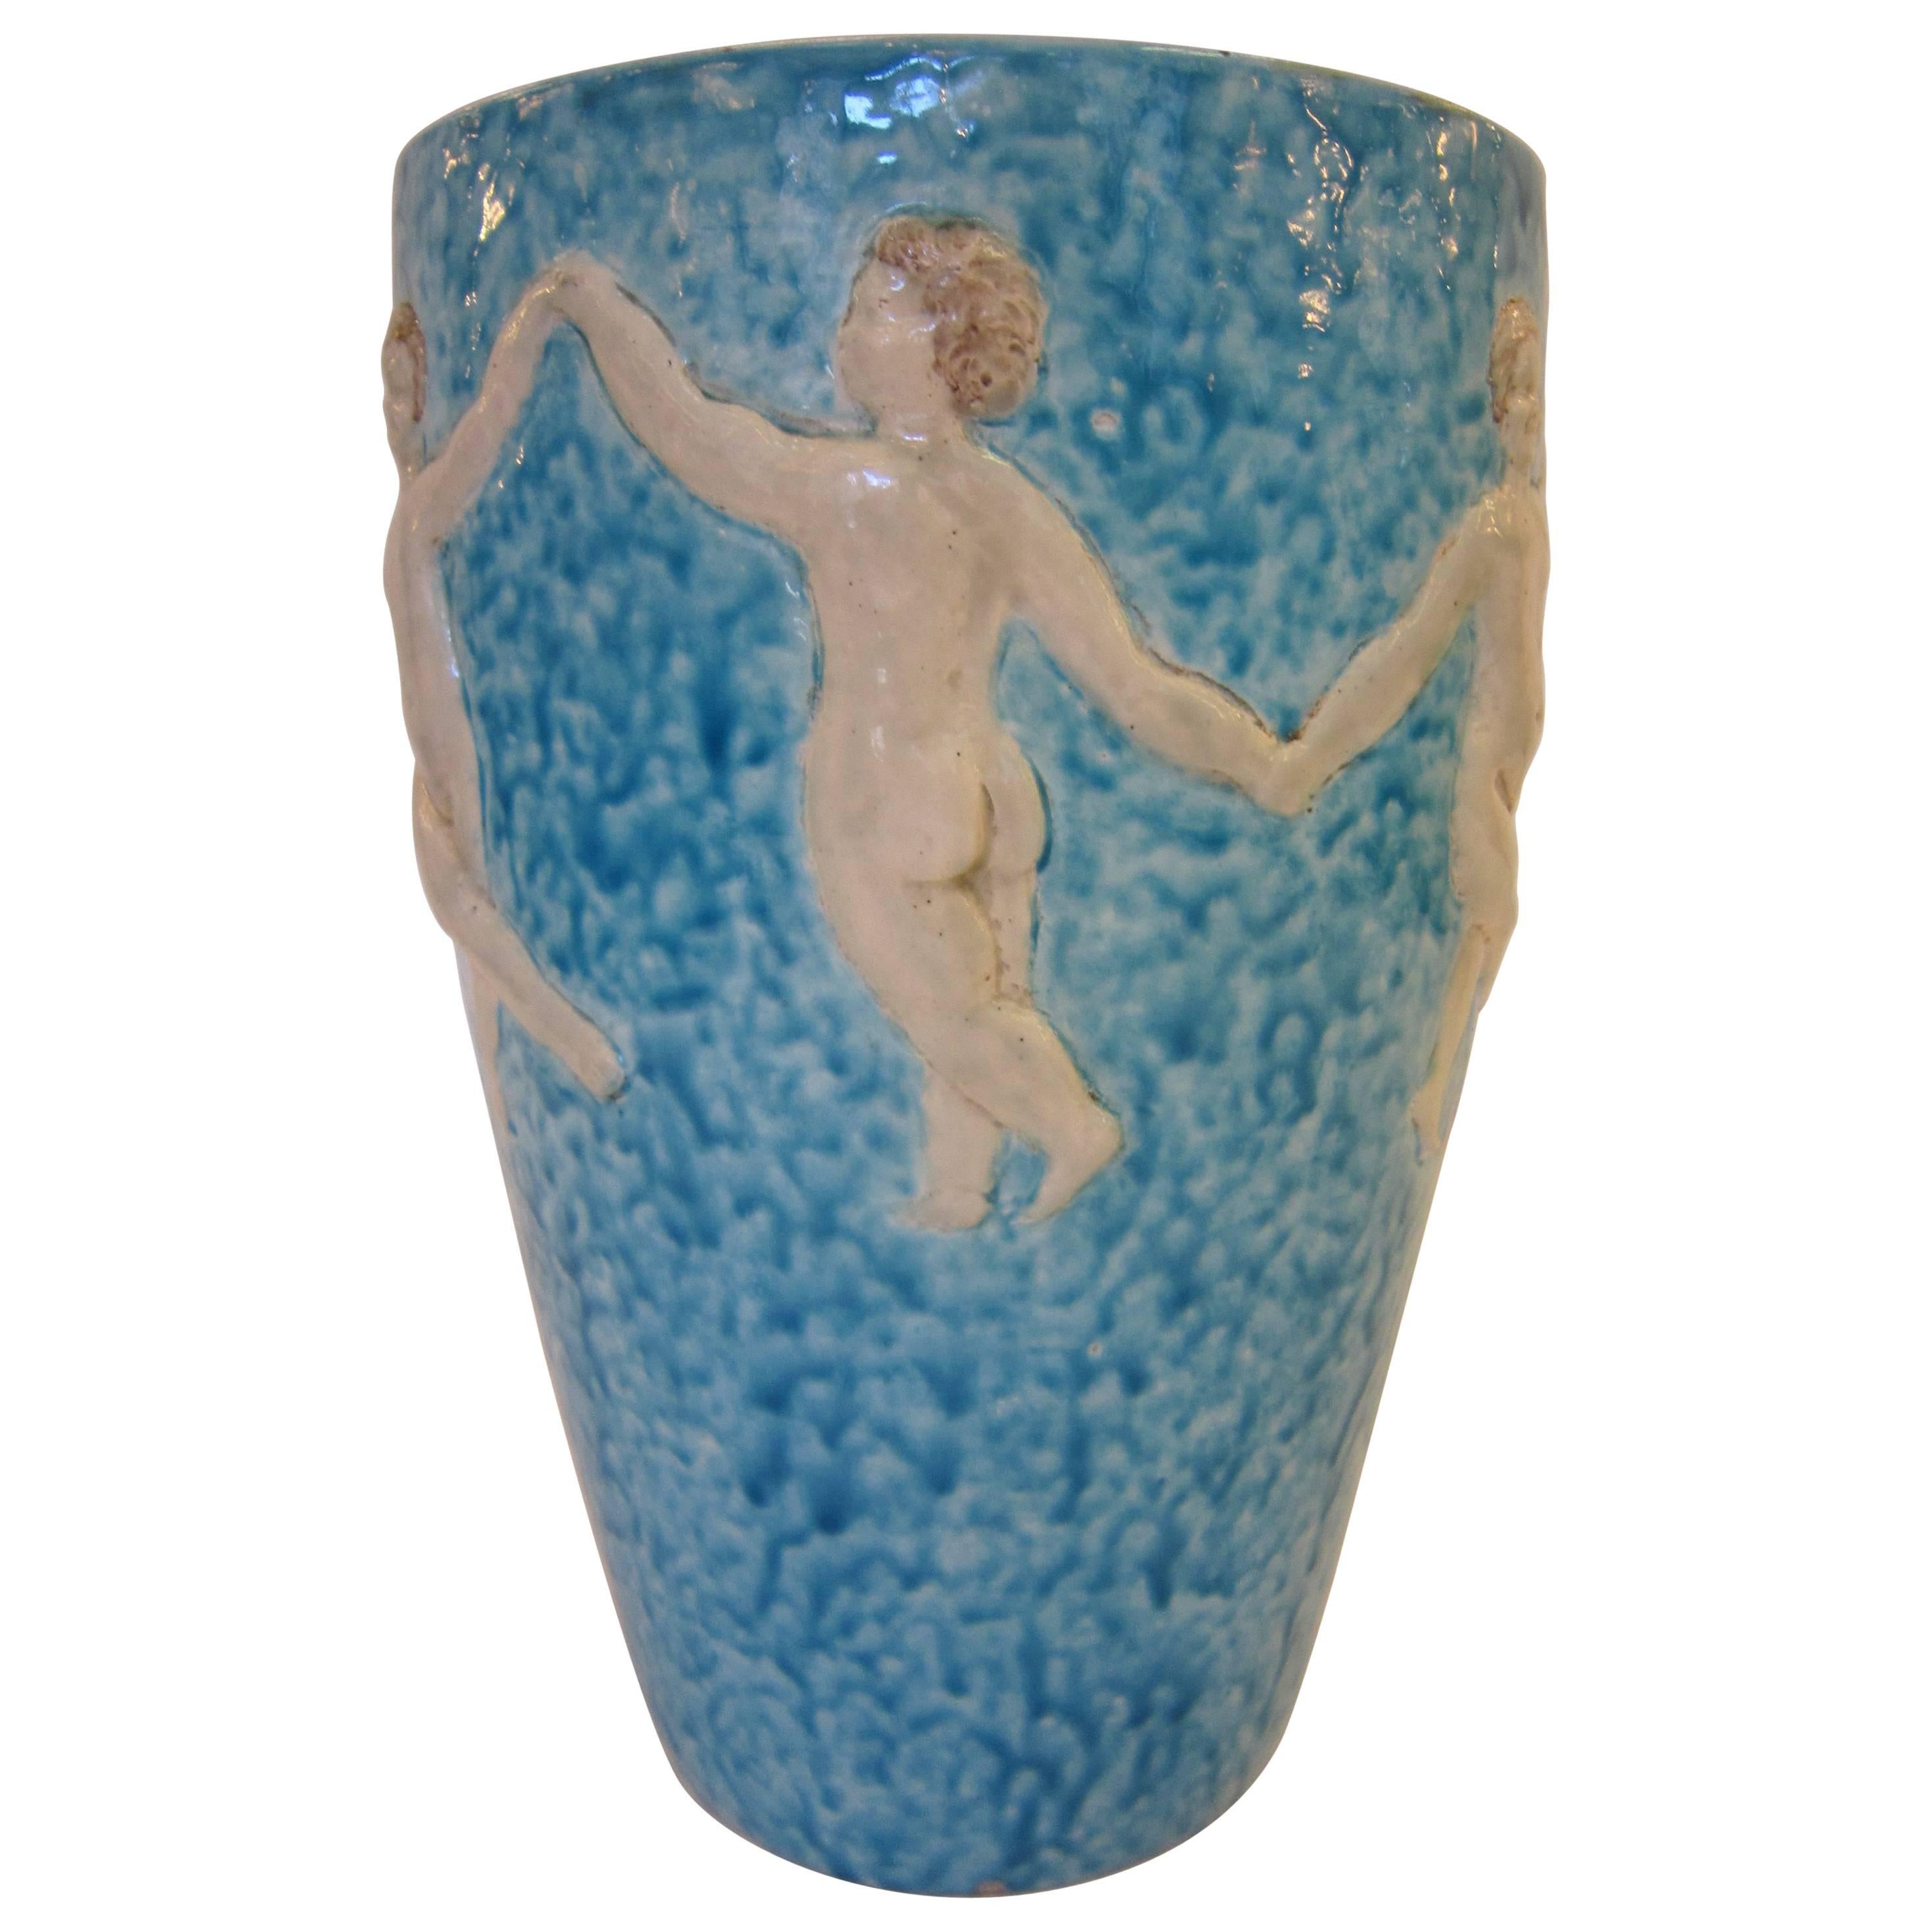 French Art Deco Turquoise Blue Pottery Vase with Children, R. Maynard